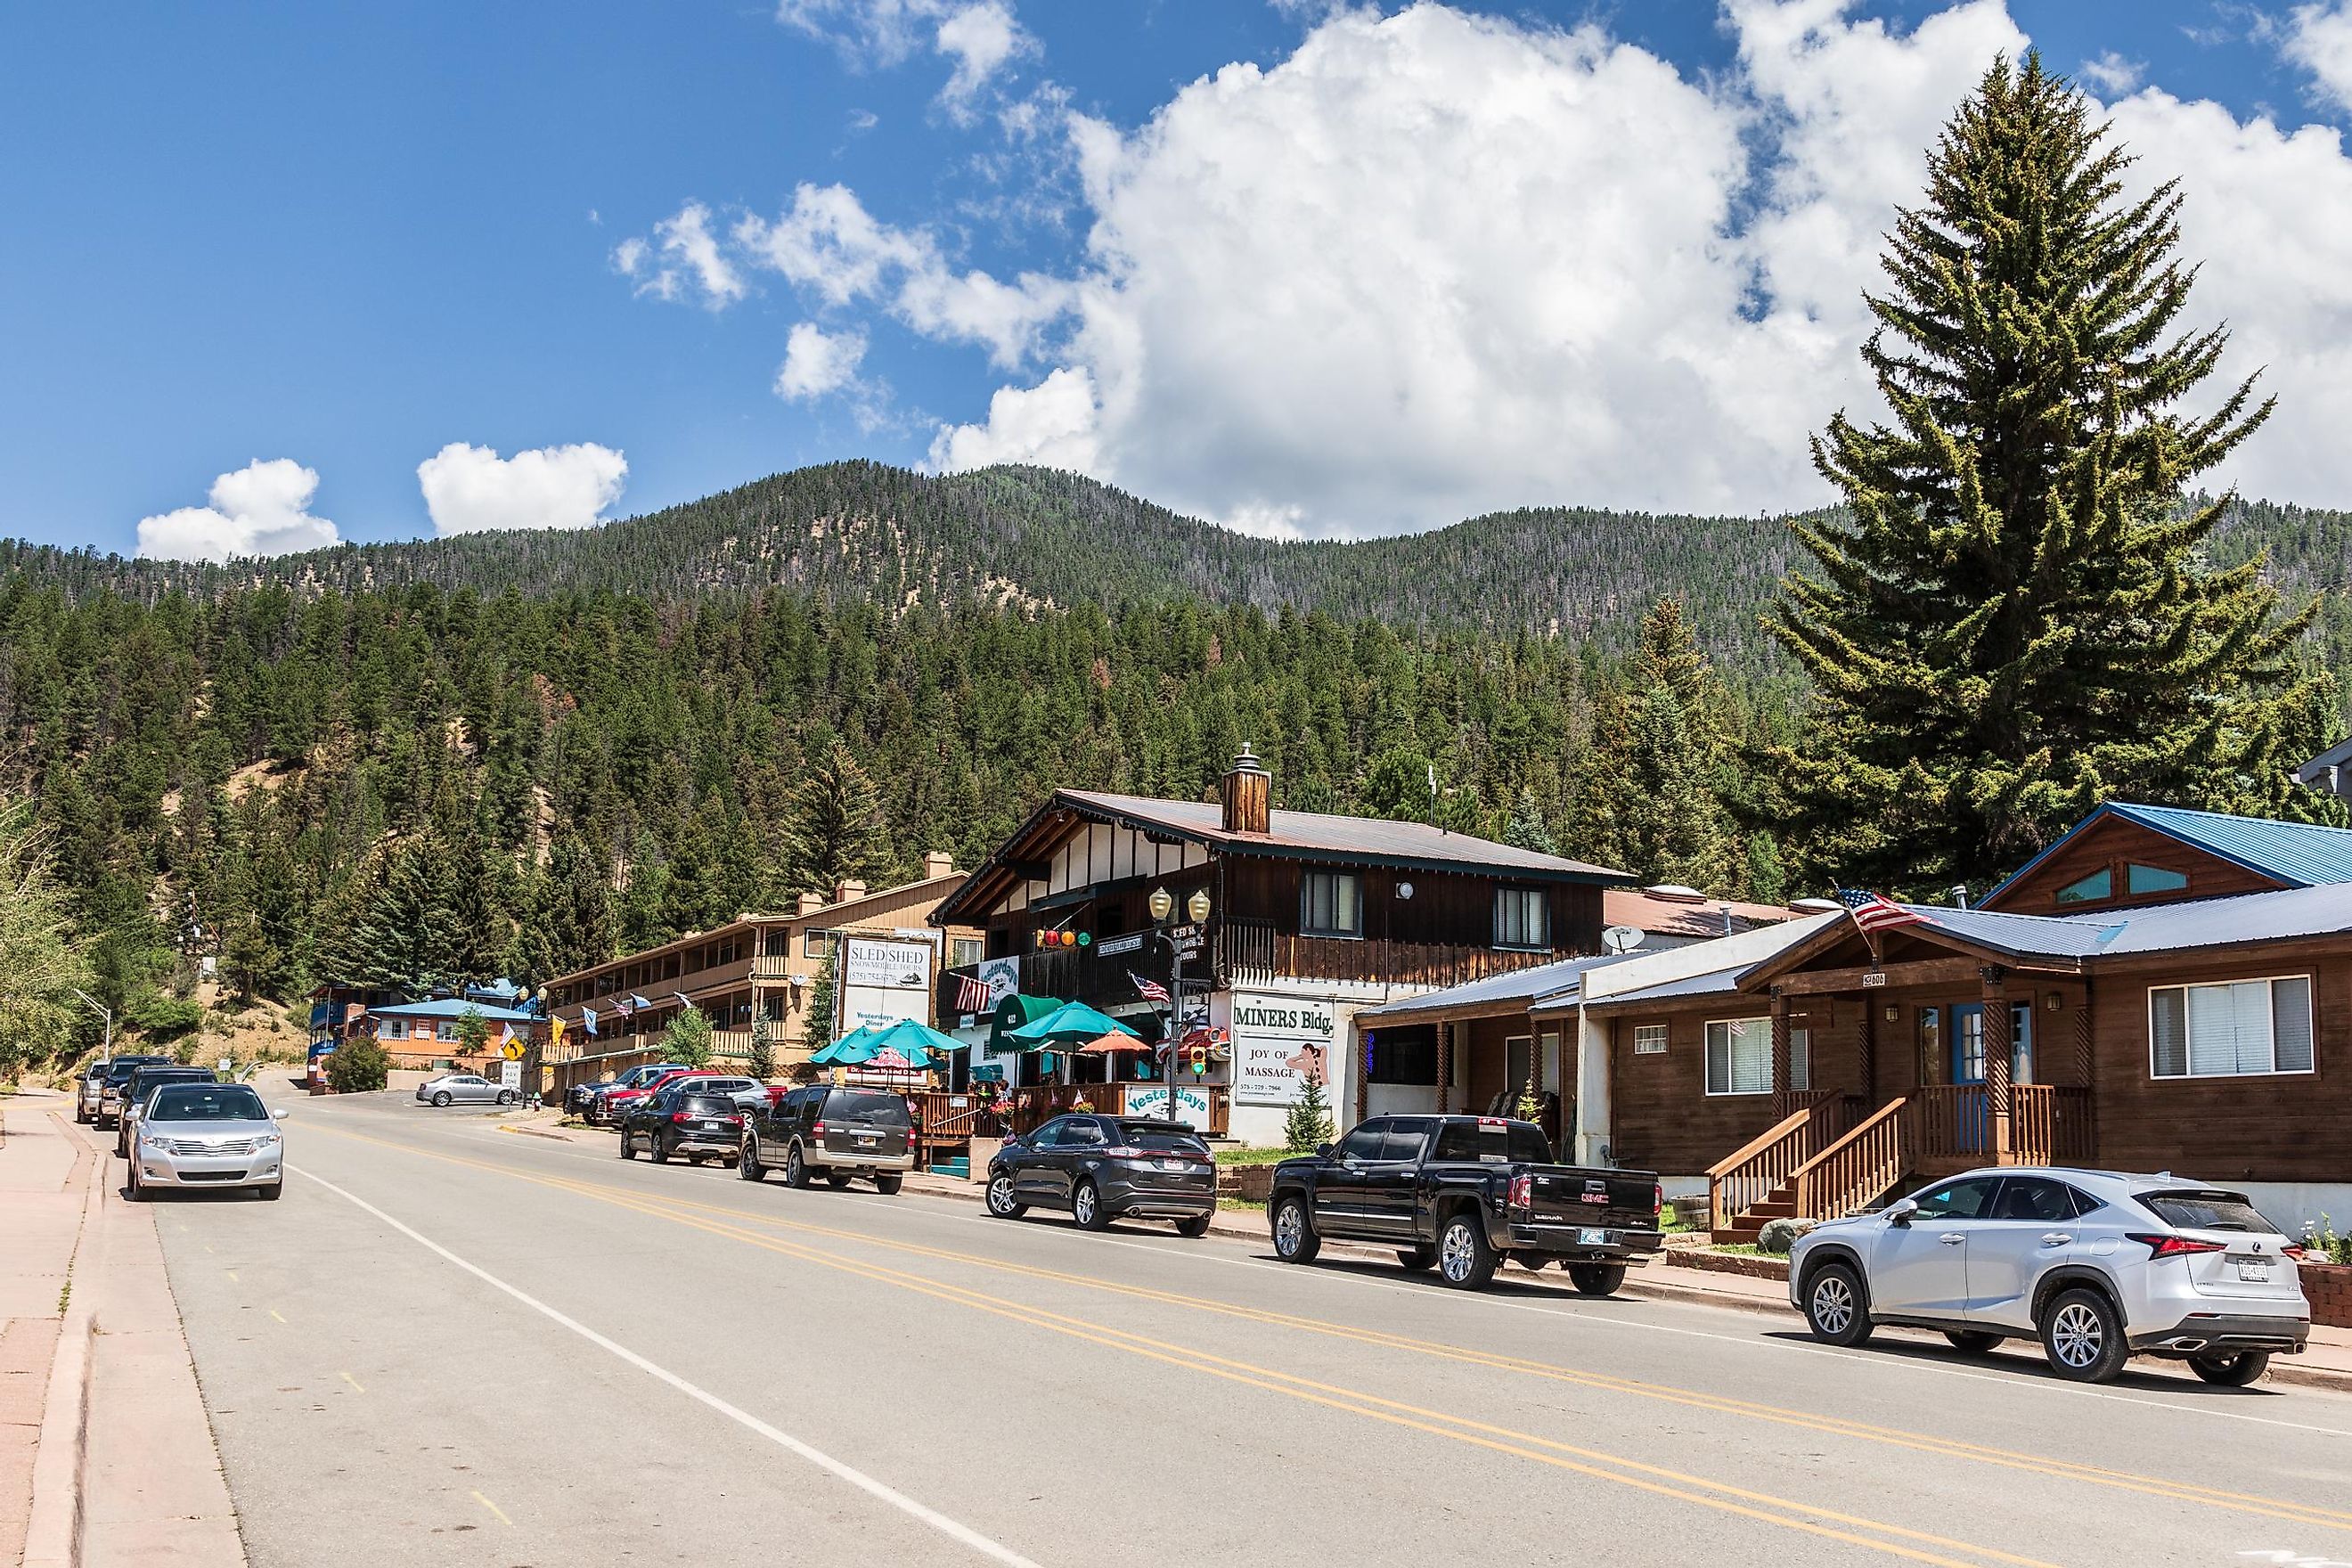  Main Street of Red River, with mountains in background.